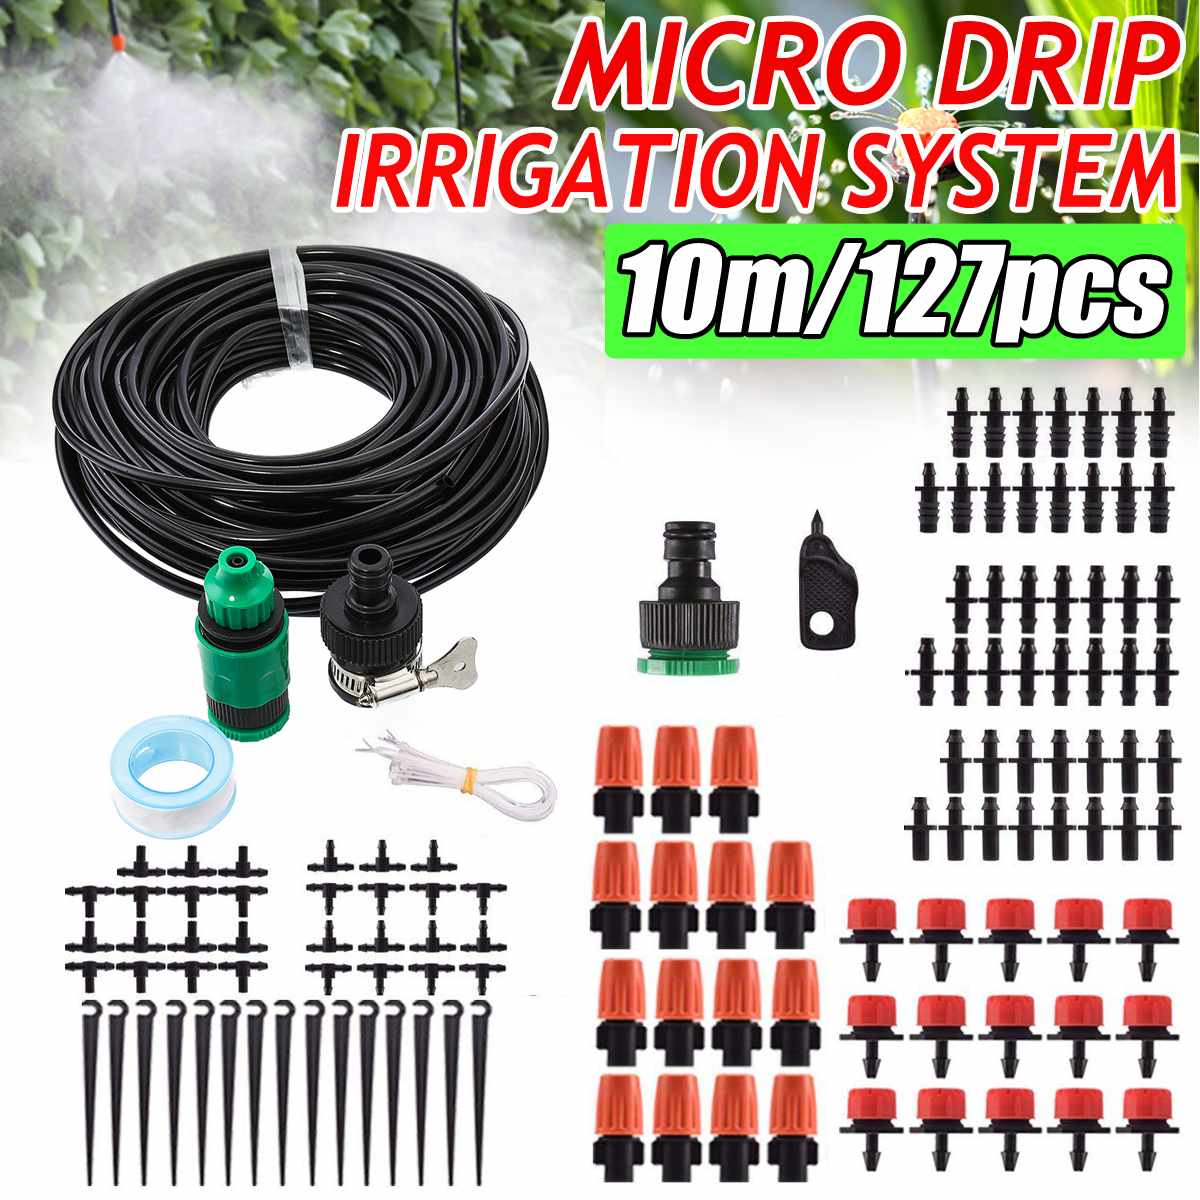 10m/5m Garden irrigation system Drip Irrigation System Automatic Watering Hose Micro Drip Watering Kits with Adjustable Drippers